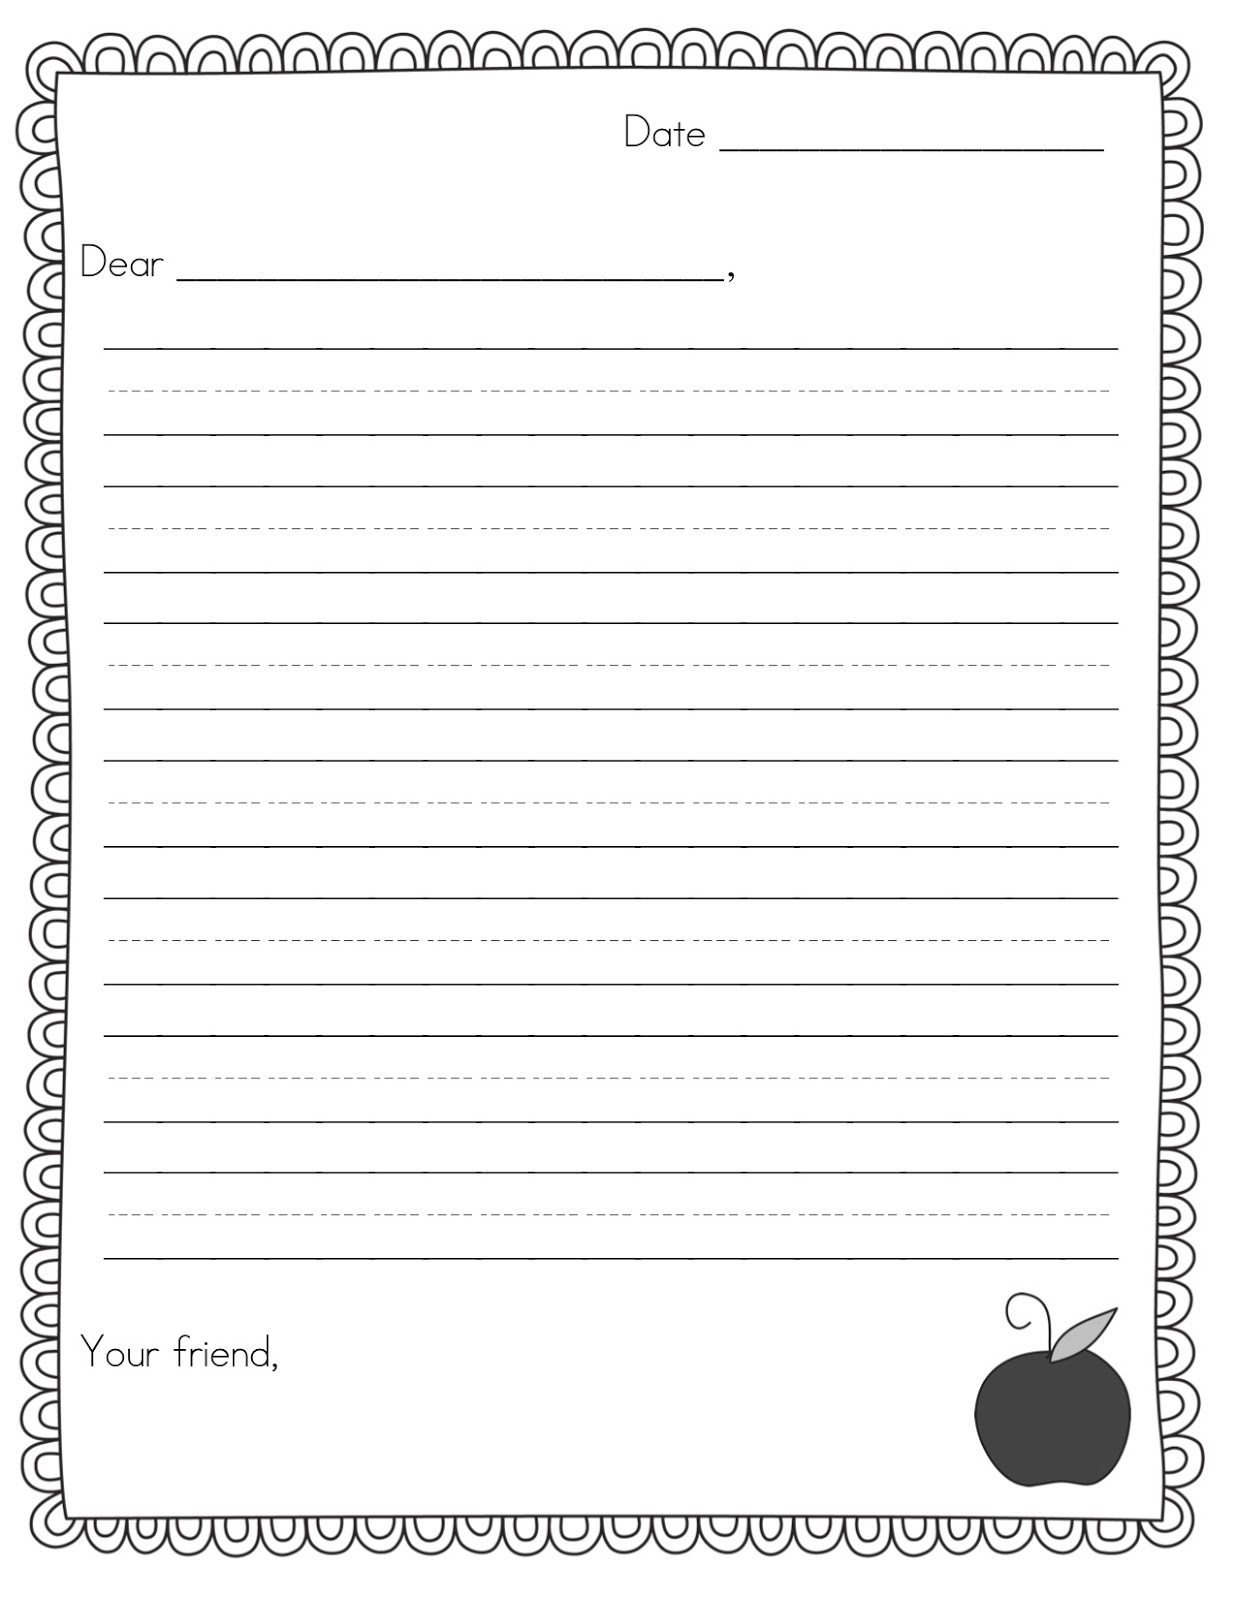 How to write a friendly letter worksheet